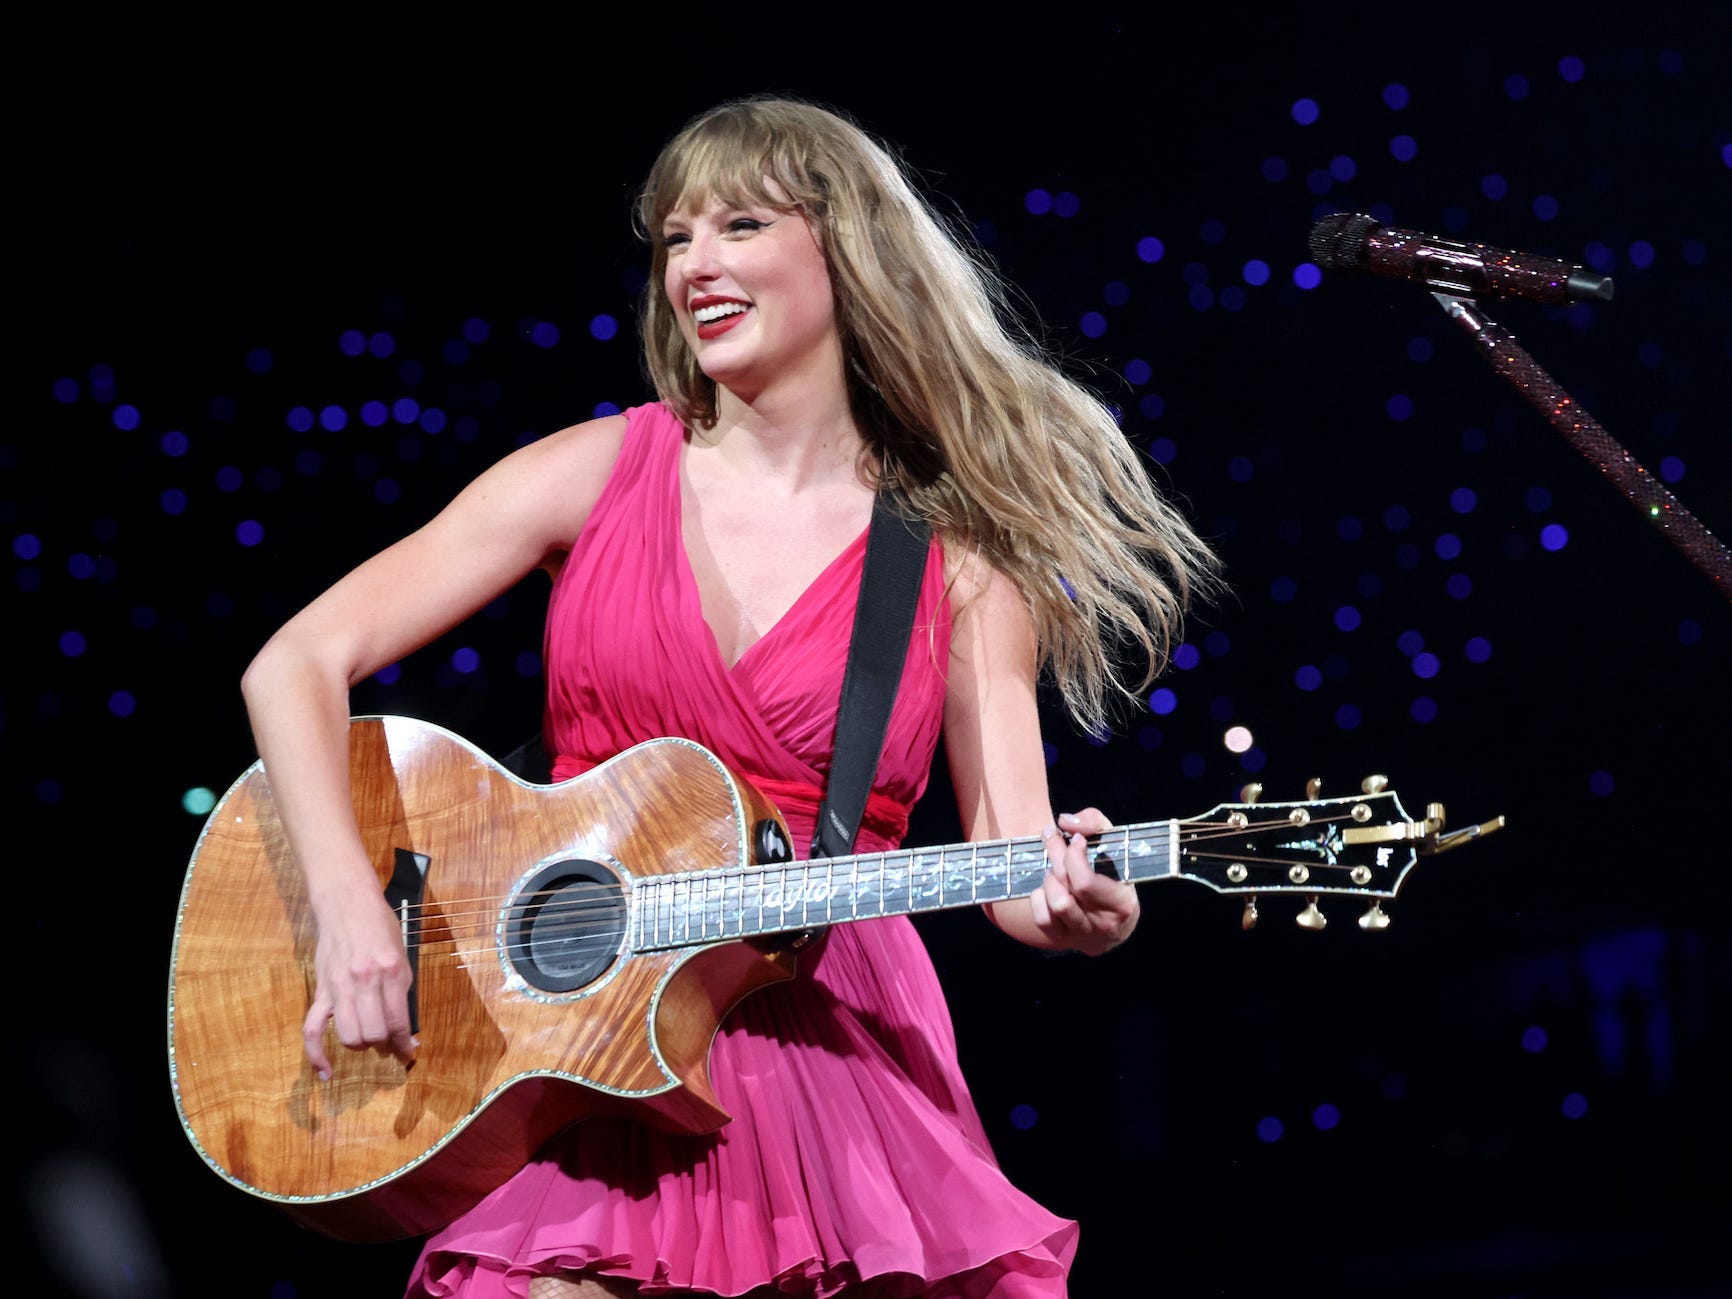 <p>During each show on The Eras Tour, Swift performs <a href="https://www.businessinsider.com/taylor-swift-eras-tour-surprise-songs-acoustic-2023-4">a two-song acoustic set that changes every night</a>. The first song is always played on acoustic guitar. </p><p>The first-ever surprise song Swift played in Arizona was "Mirrorball." For the first stop on the European leg, she chose <a href="https://www.businessinsider.com/taylor-swift-midnights-bonus-tracks-3am-version-album-review-breakdown-2022-10">the "Midnights" bonus cut "Paris."</a></p>